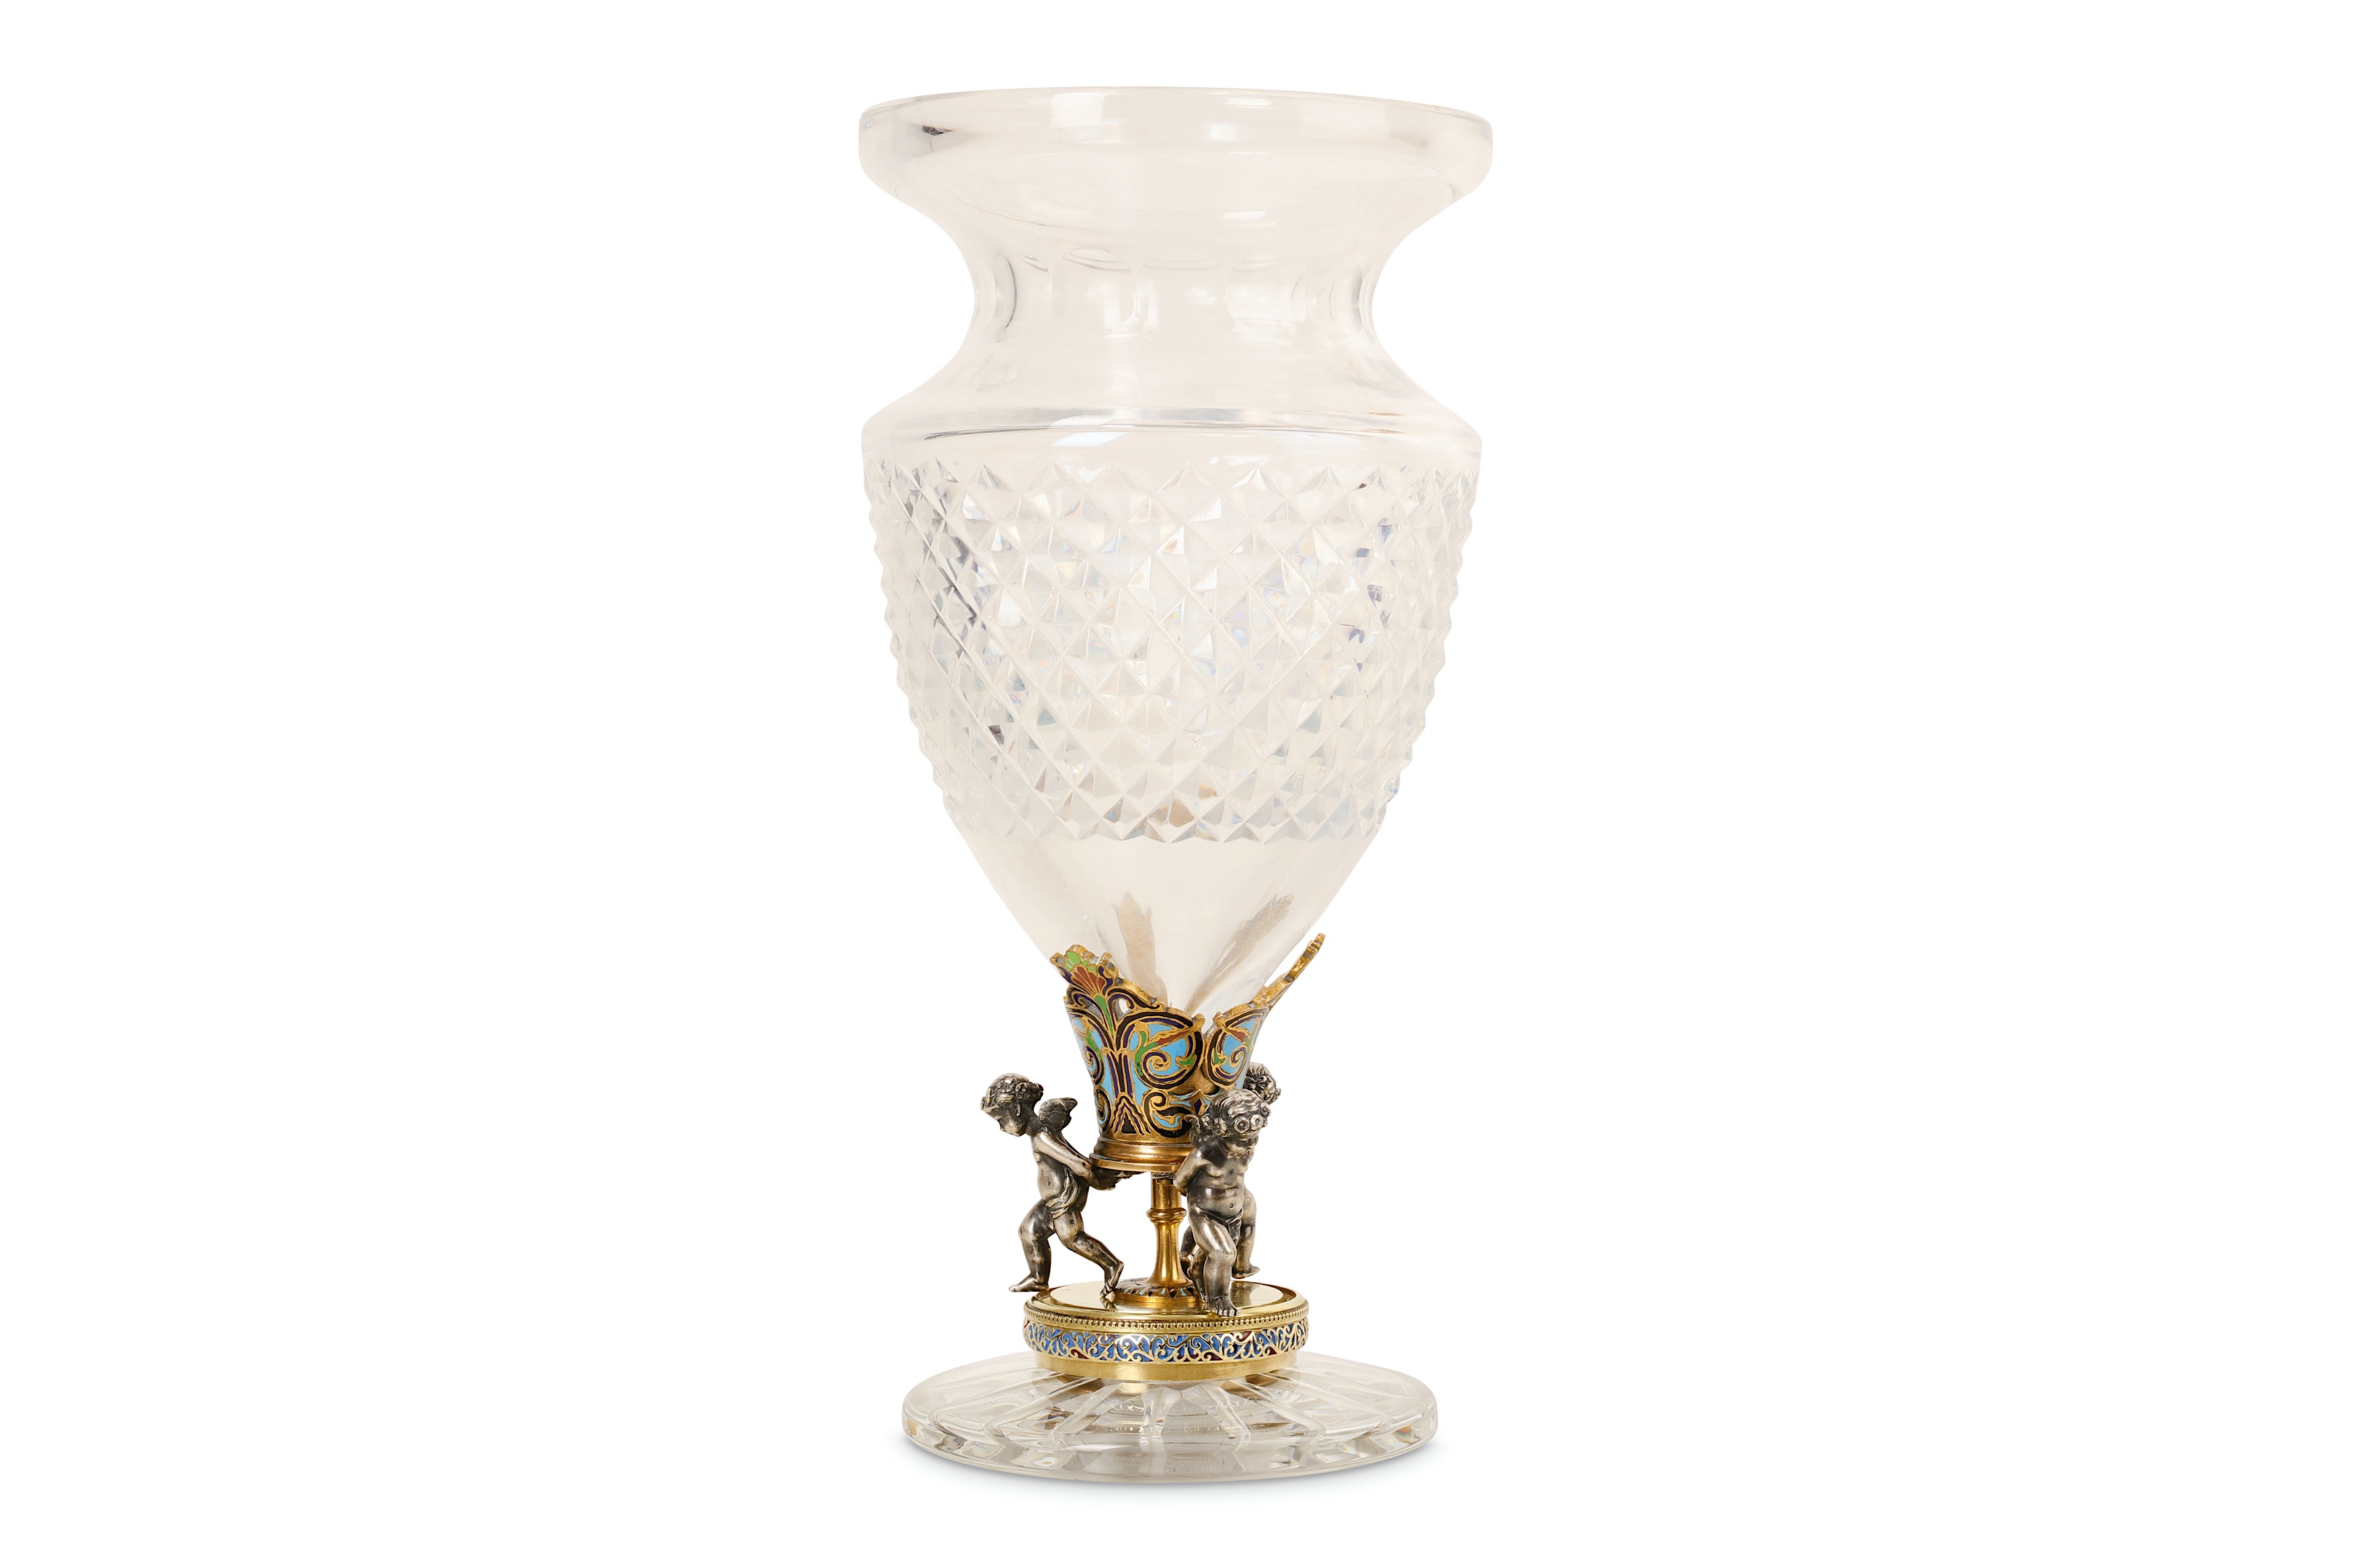 AN EARLY 20TH CENTURY FRENCH BACCARAT STYLE GILT, SILVERED AND CHAMPLEVE MOUNTED GLASS VASE the vase - Image 2 of 4